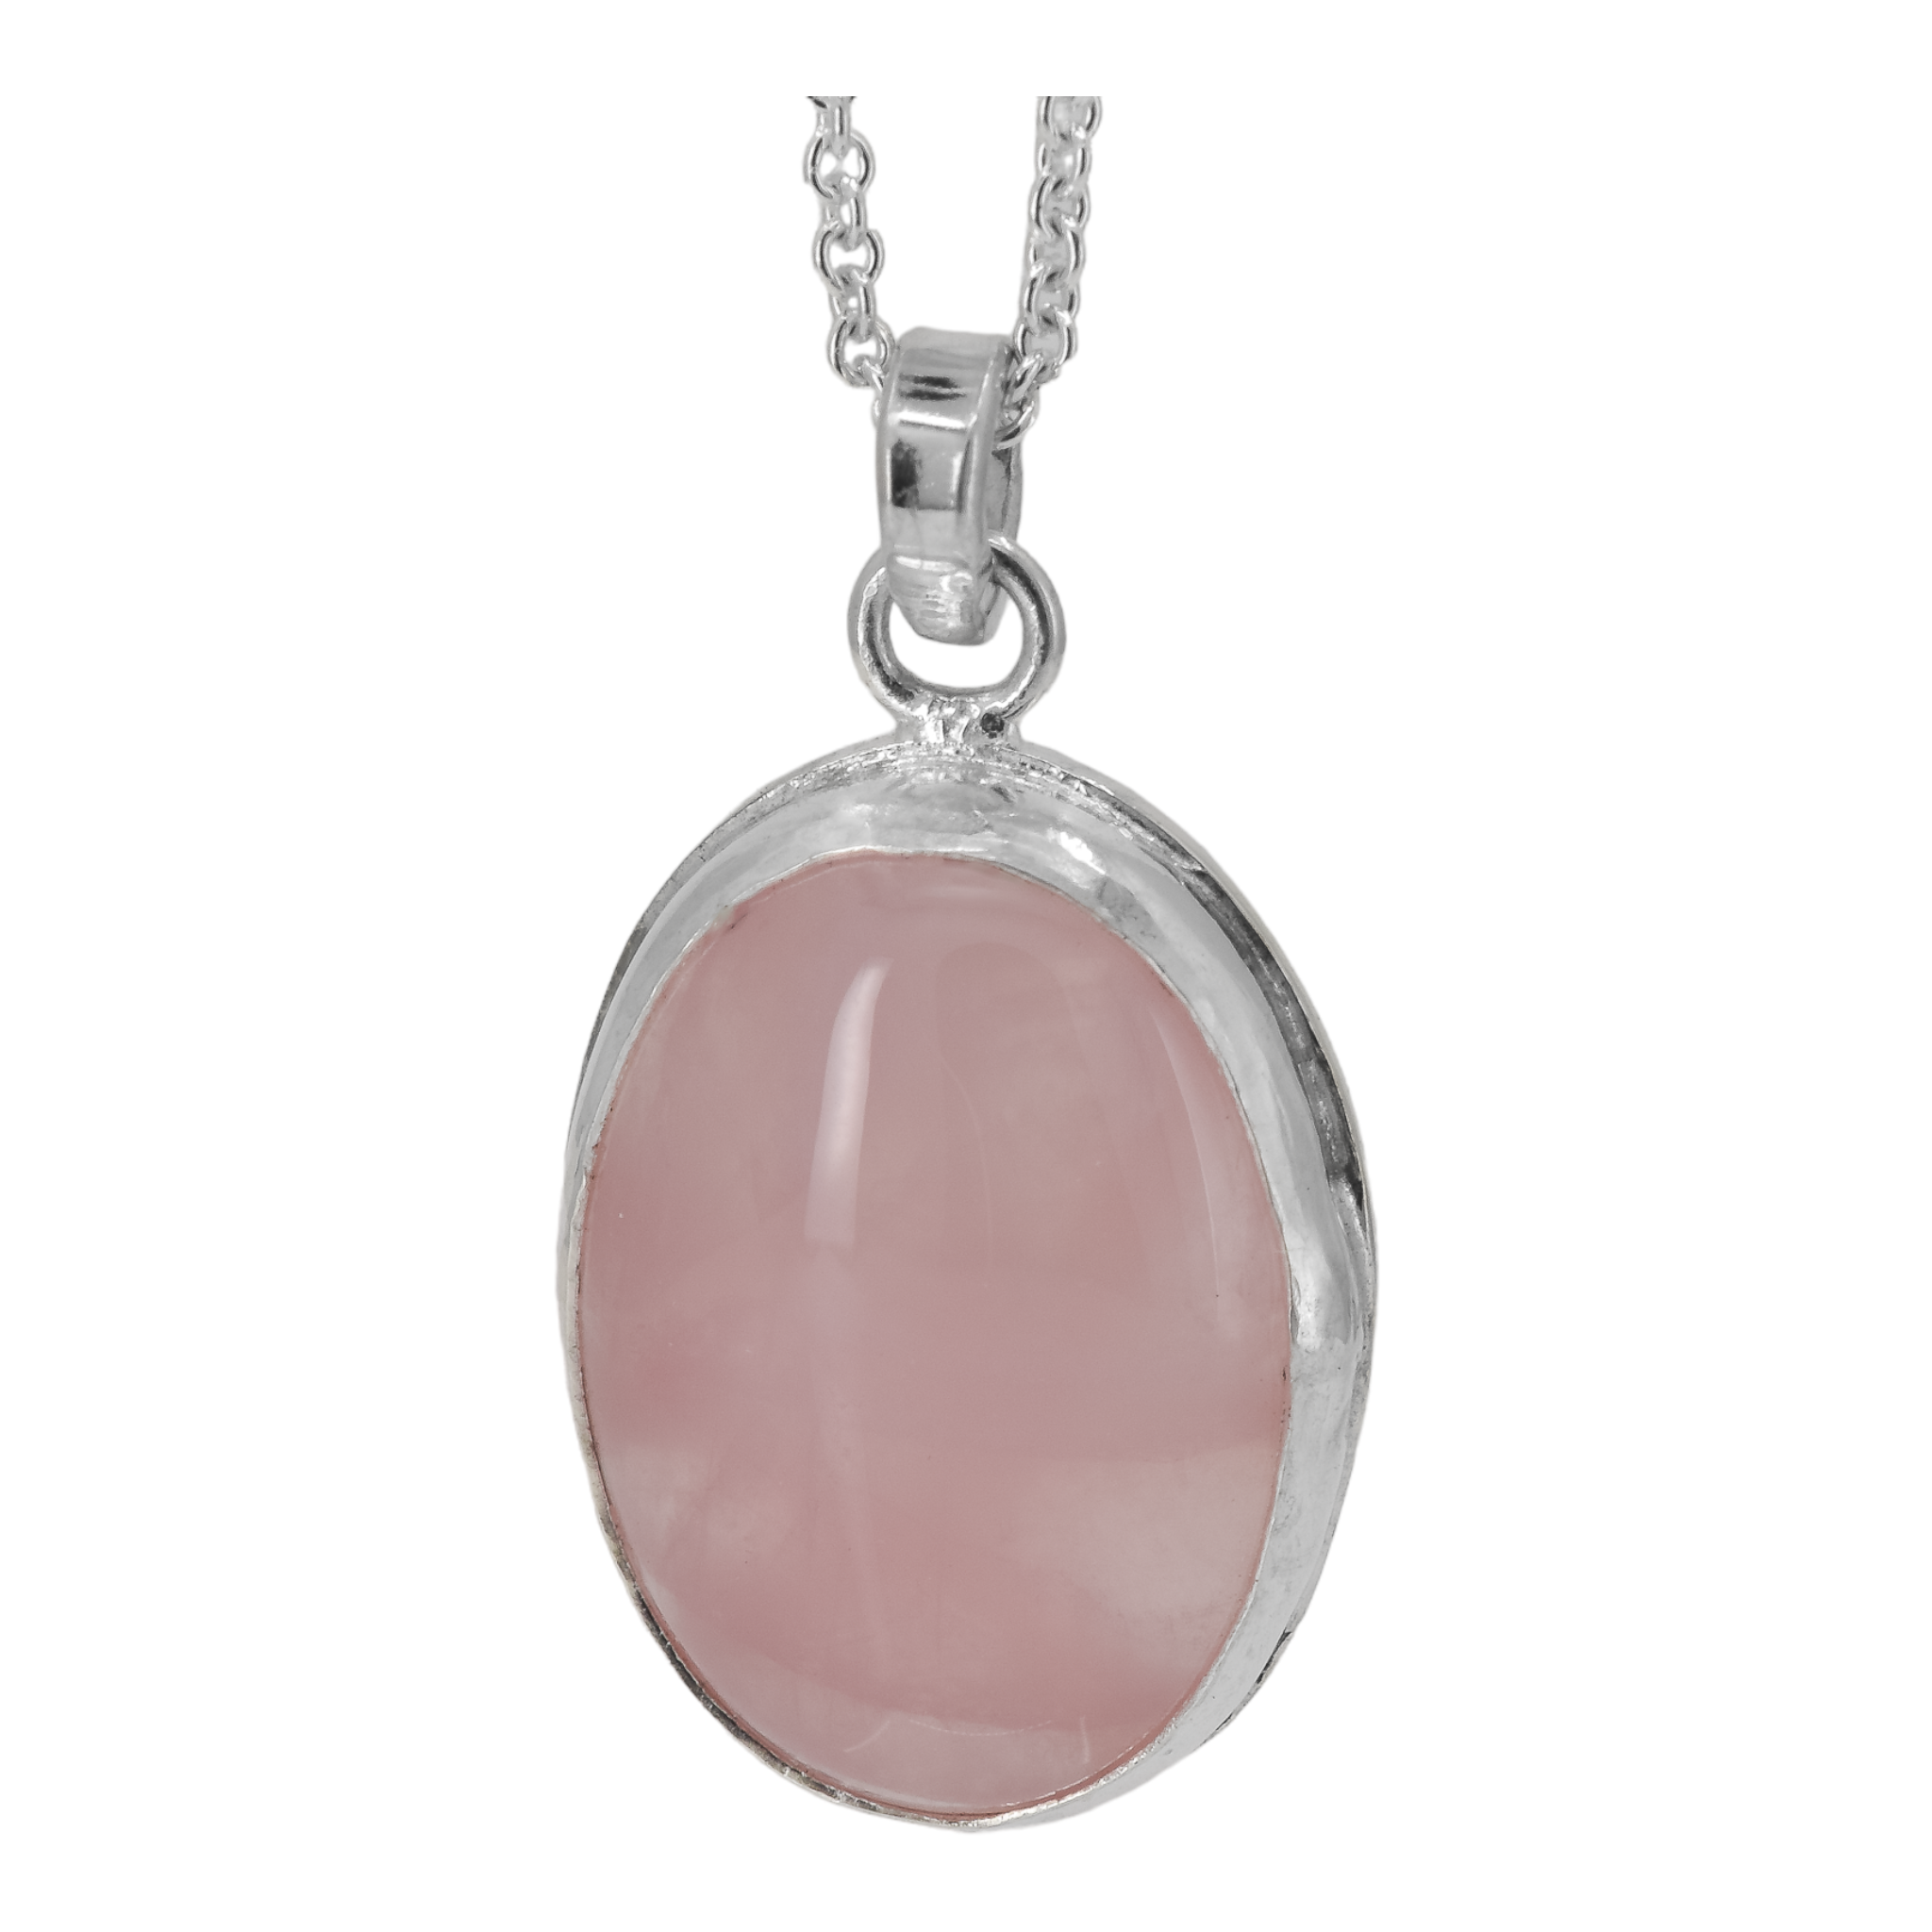 Oval rose quartz pendant necklace in sterling silver